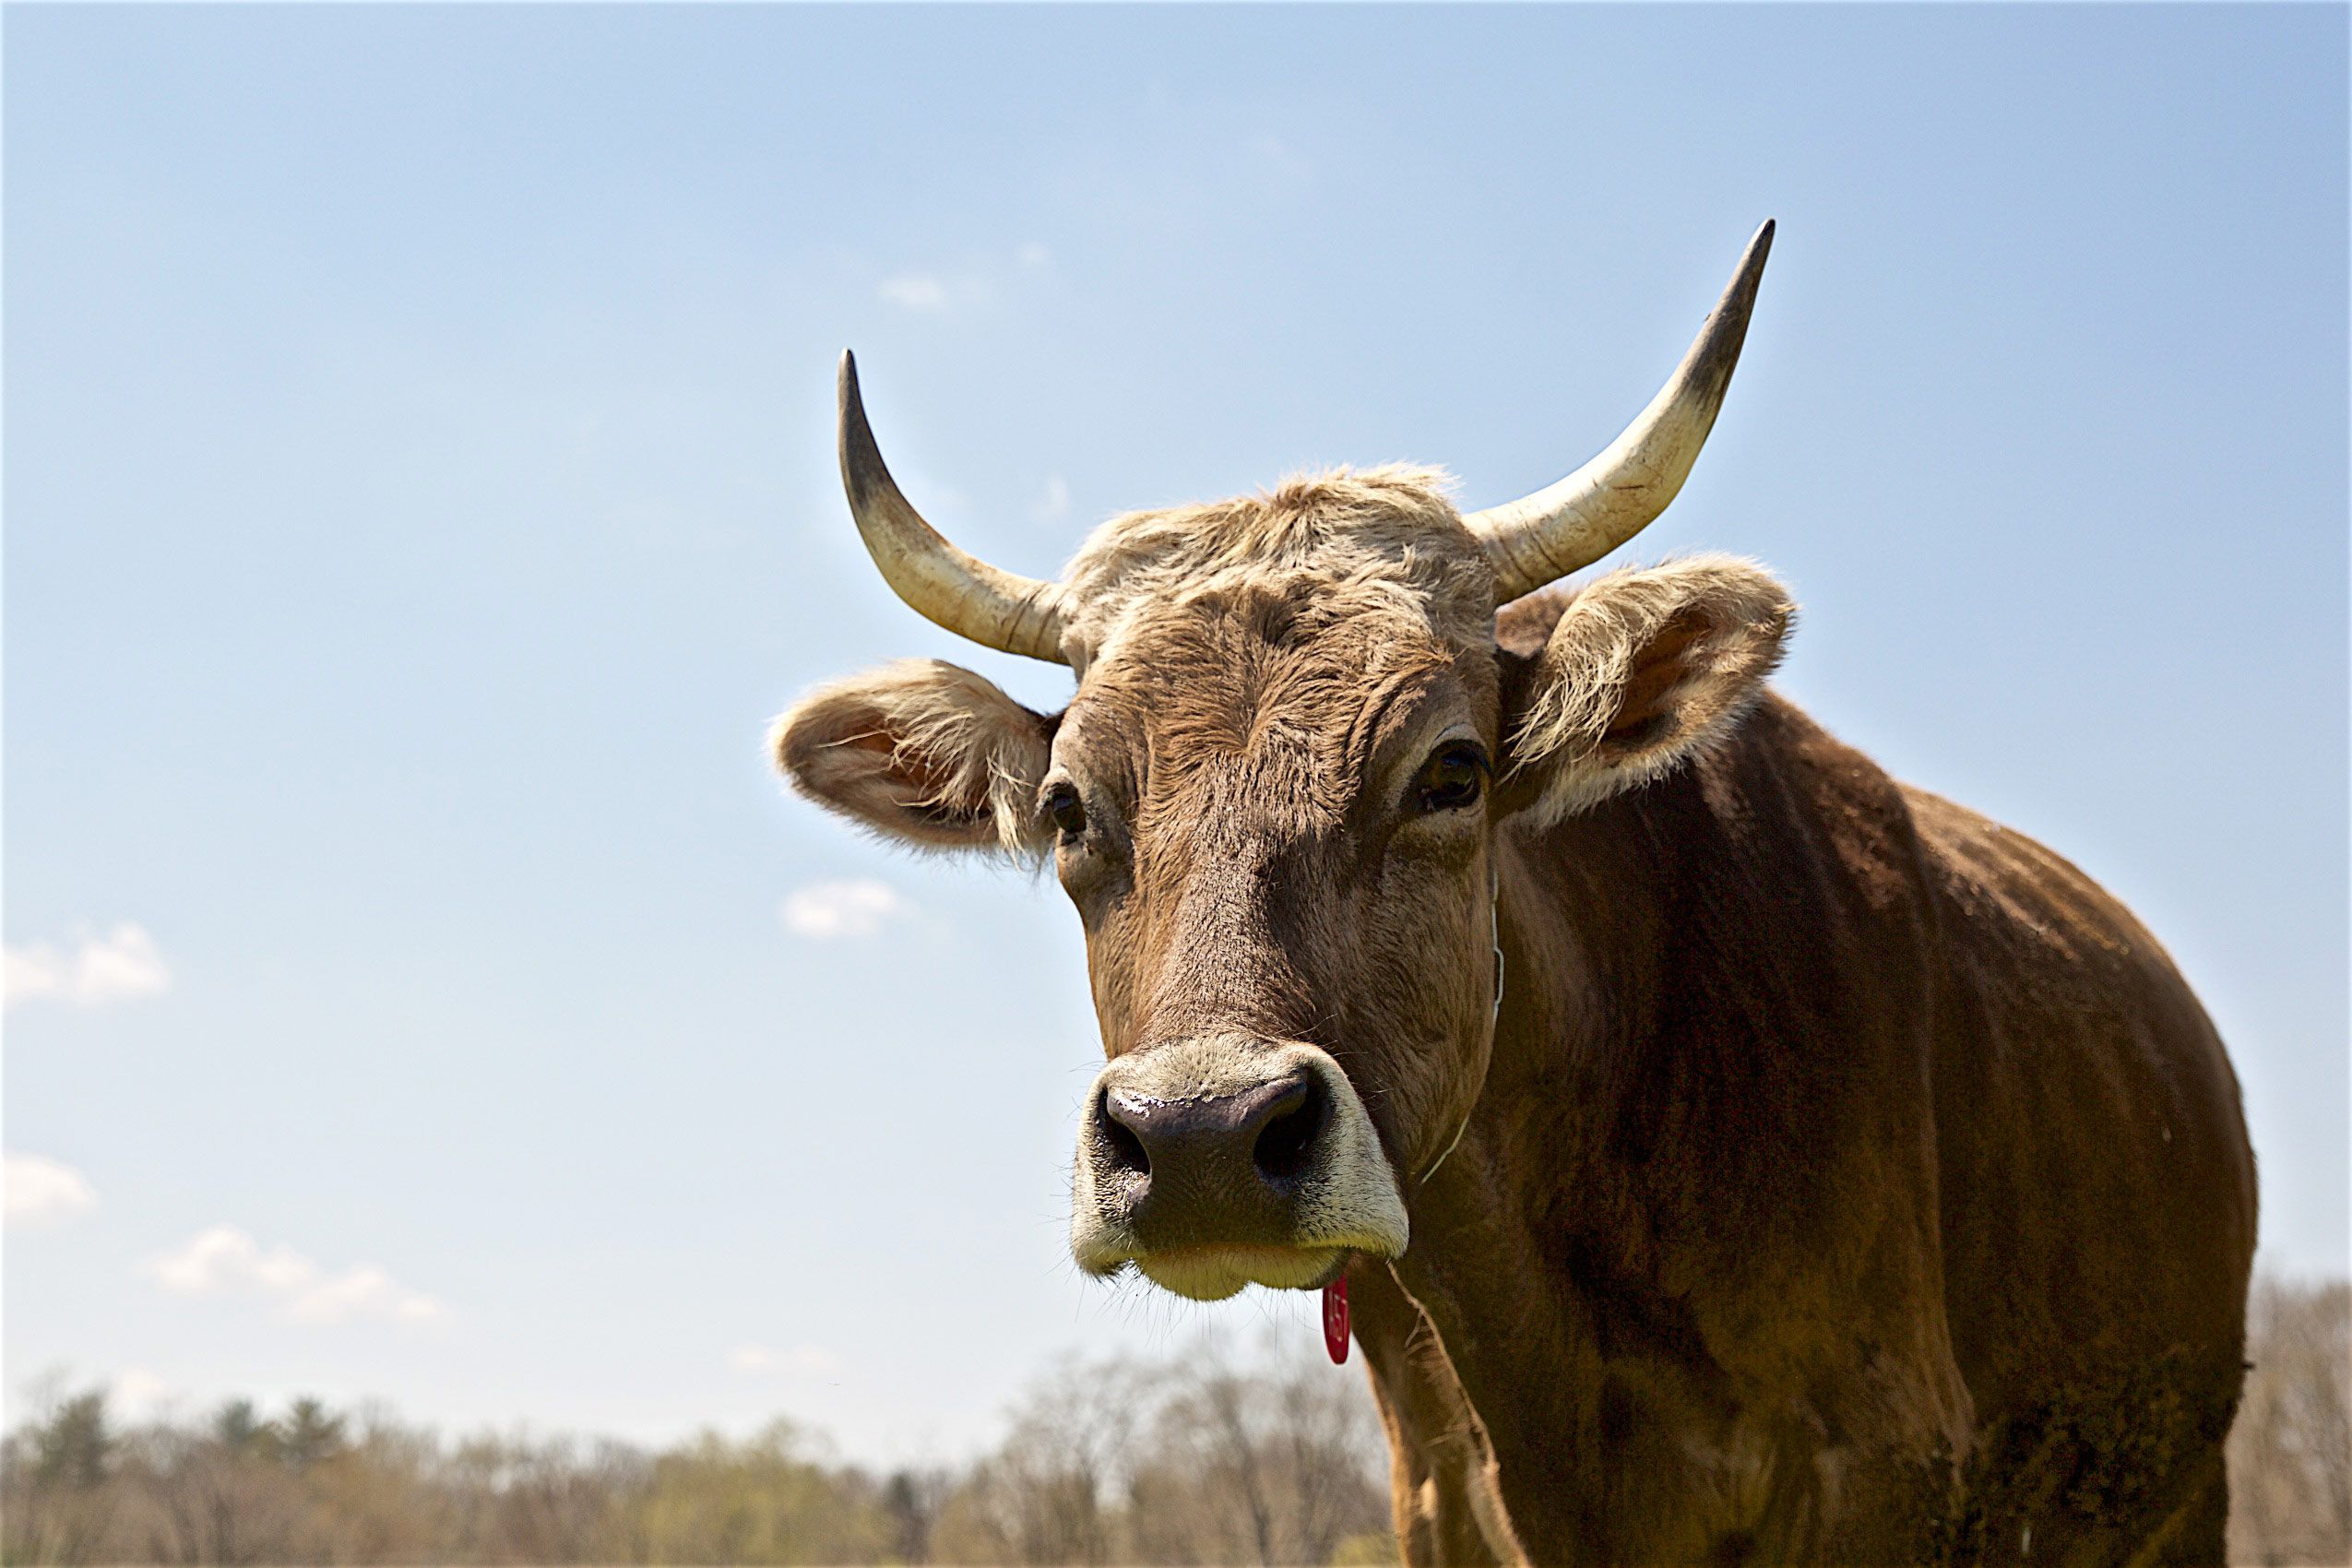 Adult Bull Cow With Horns